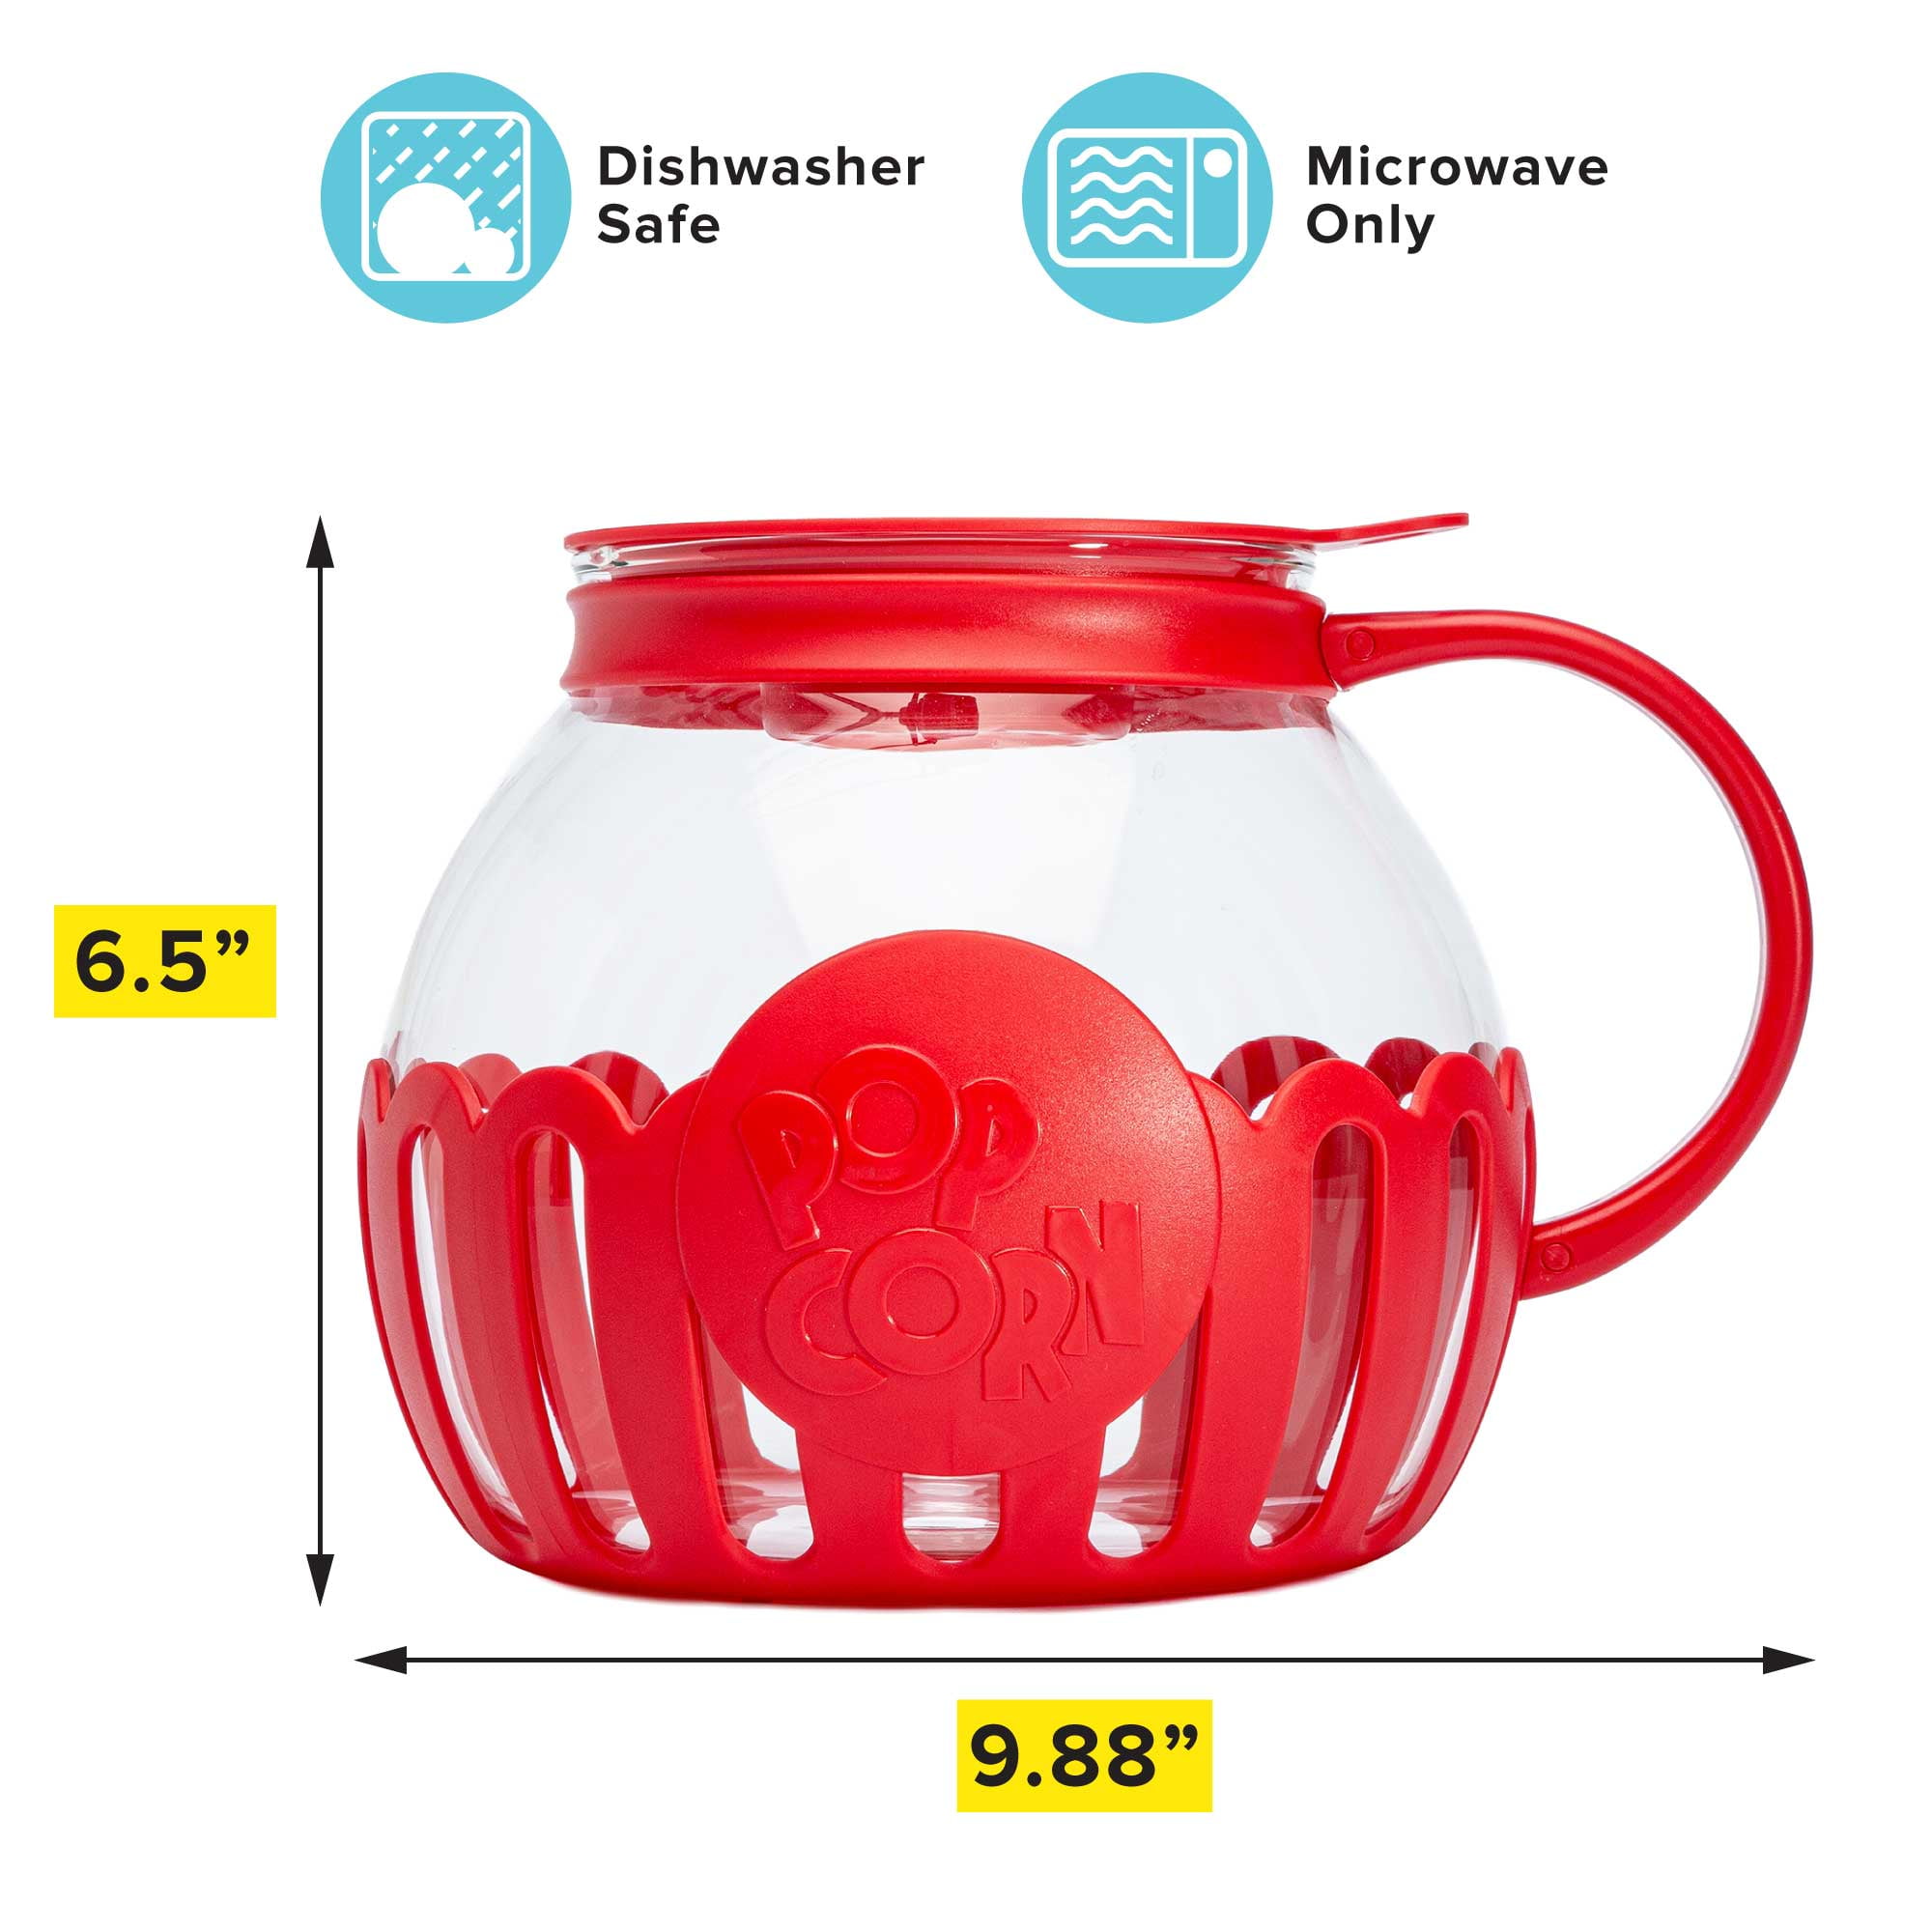 Tasty Red Ecolution Micro Pop Popcorn Popper 1.5 Quart with Instructions